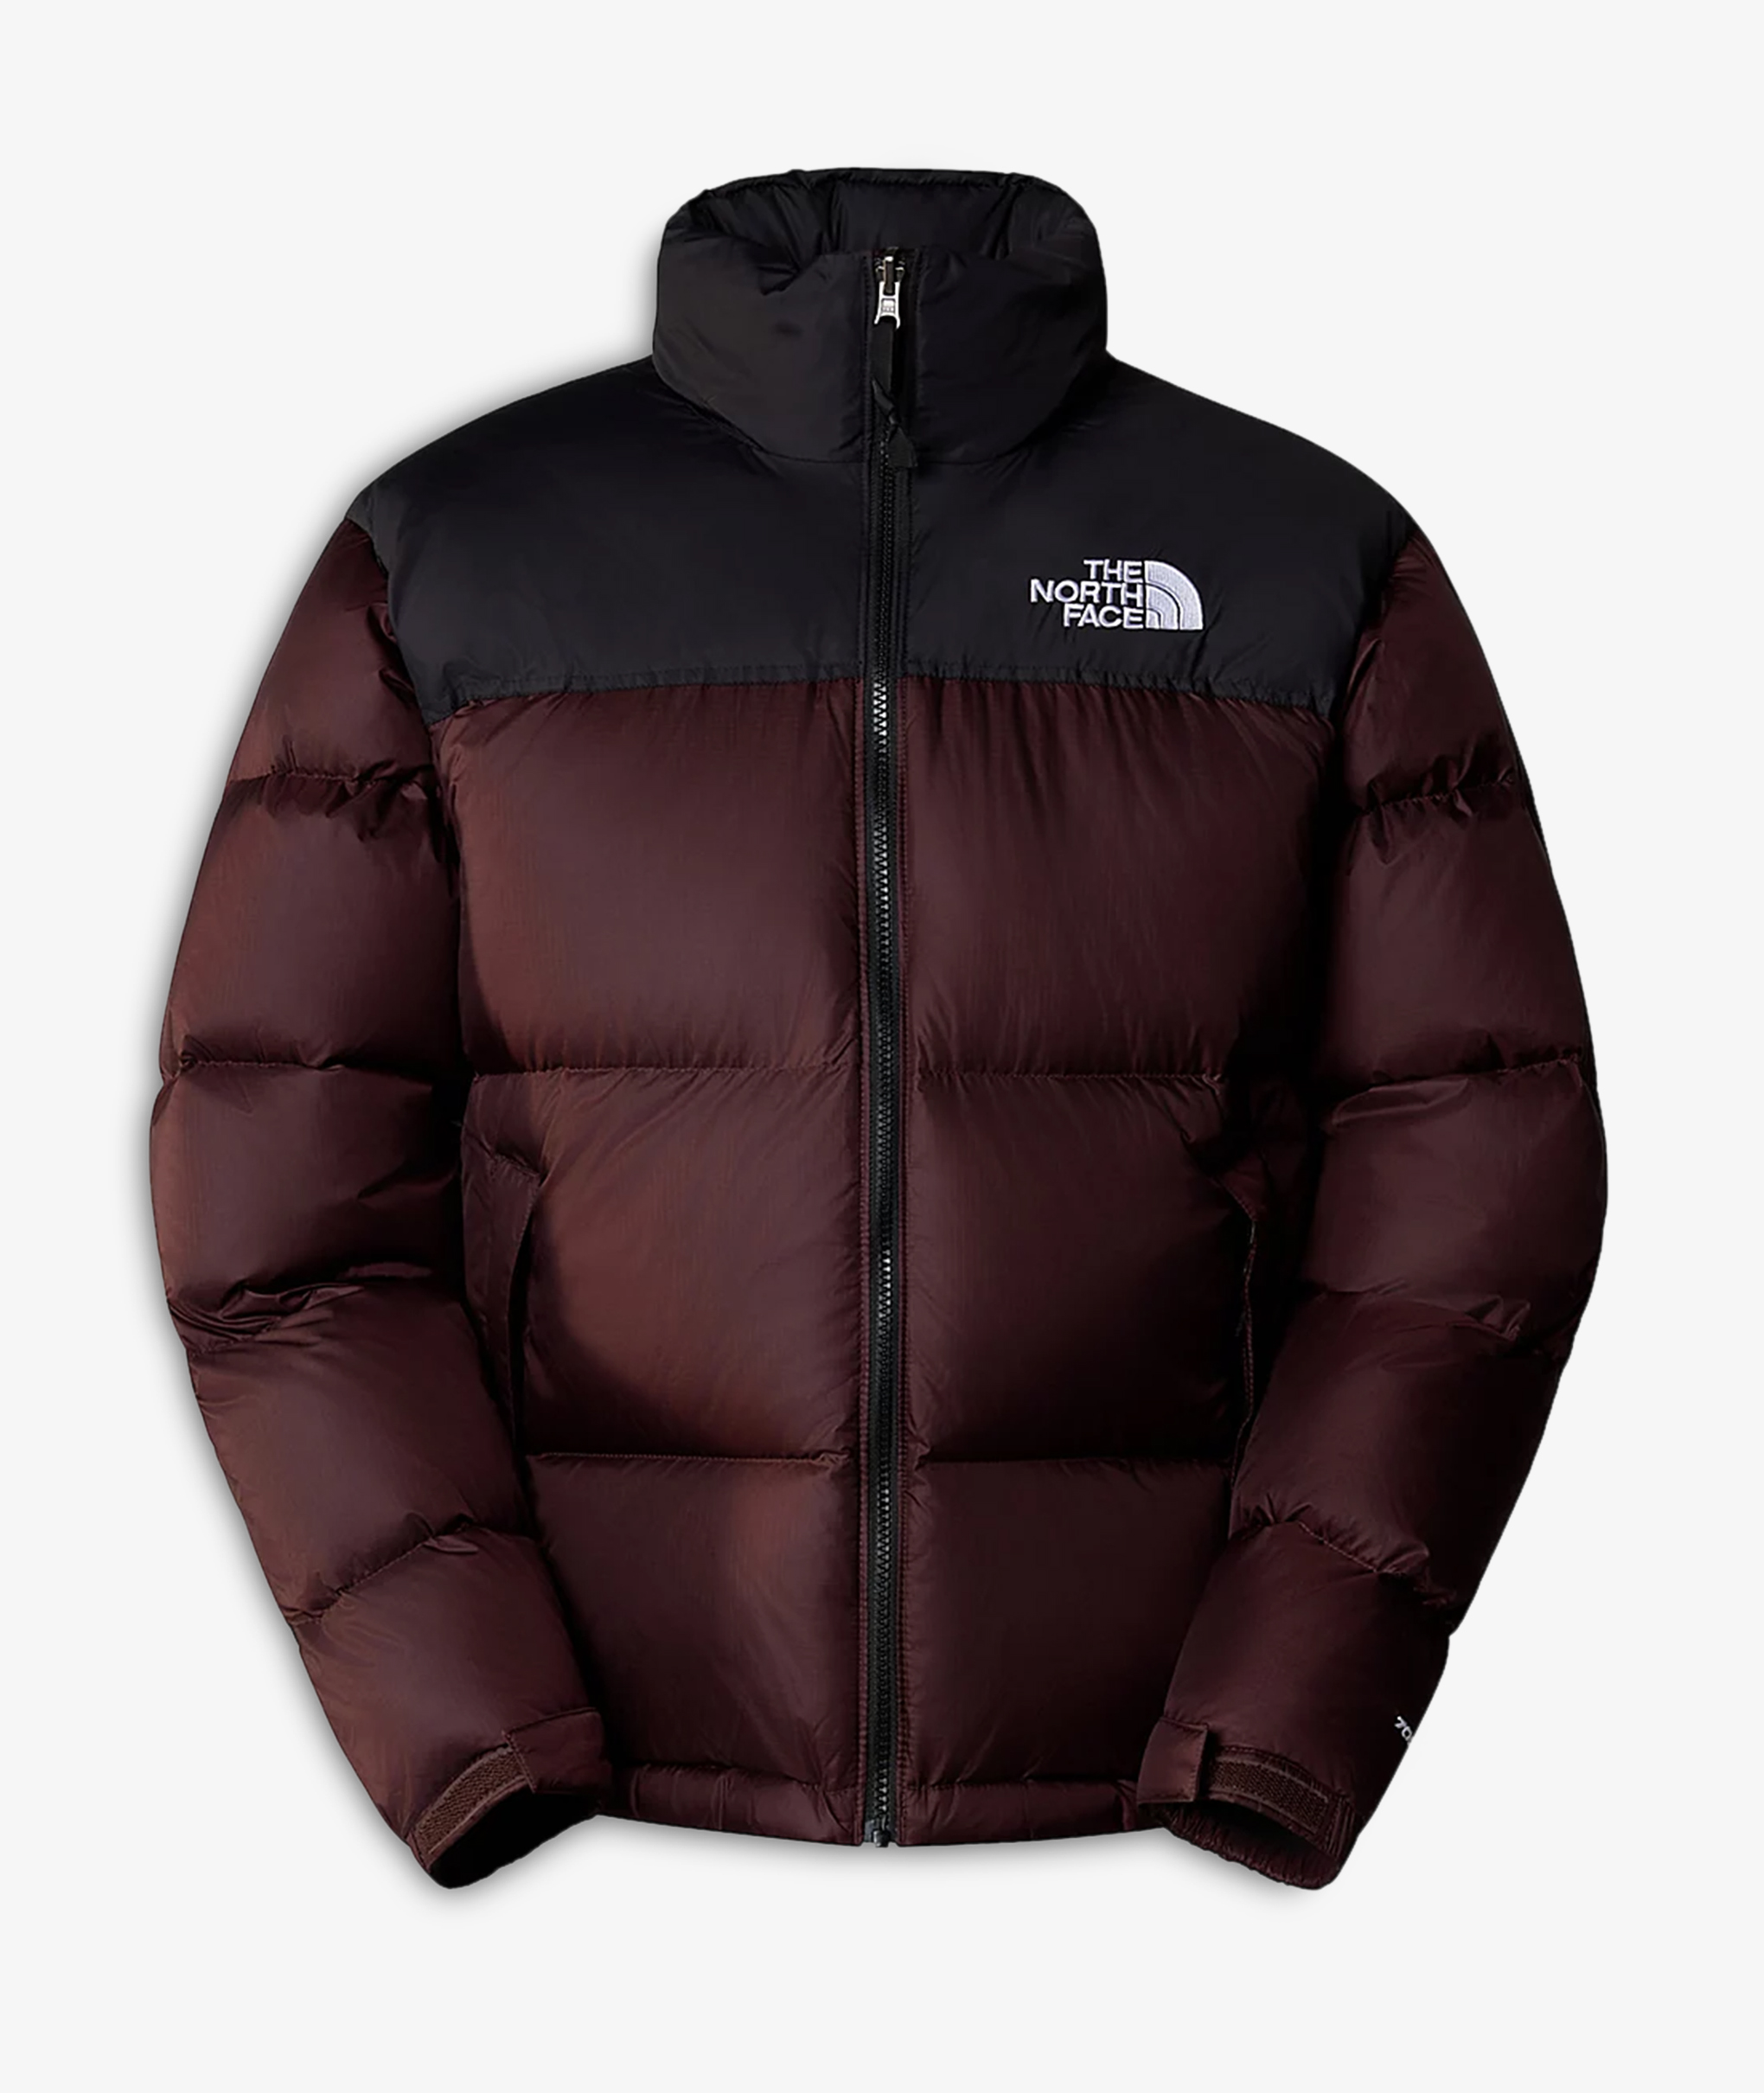 Norse Store | Shipping Worldwide - The North Face M 96 RETRO NUPTSE JKT ...